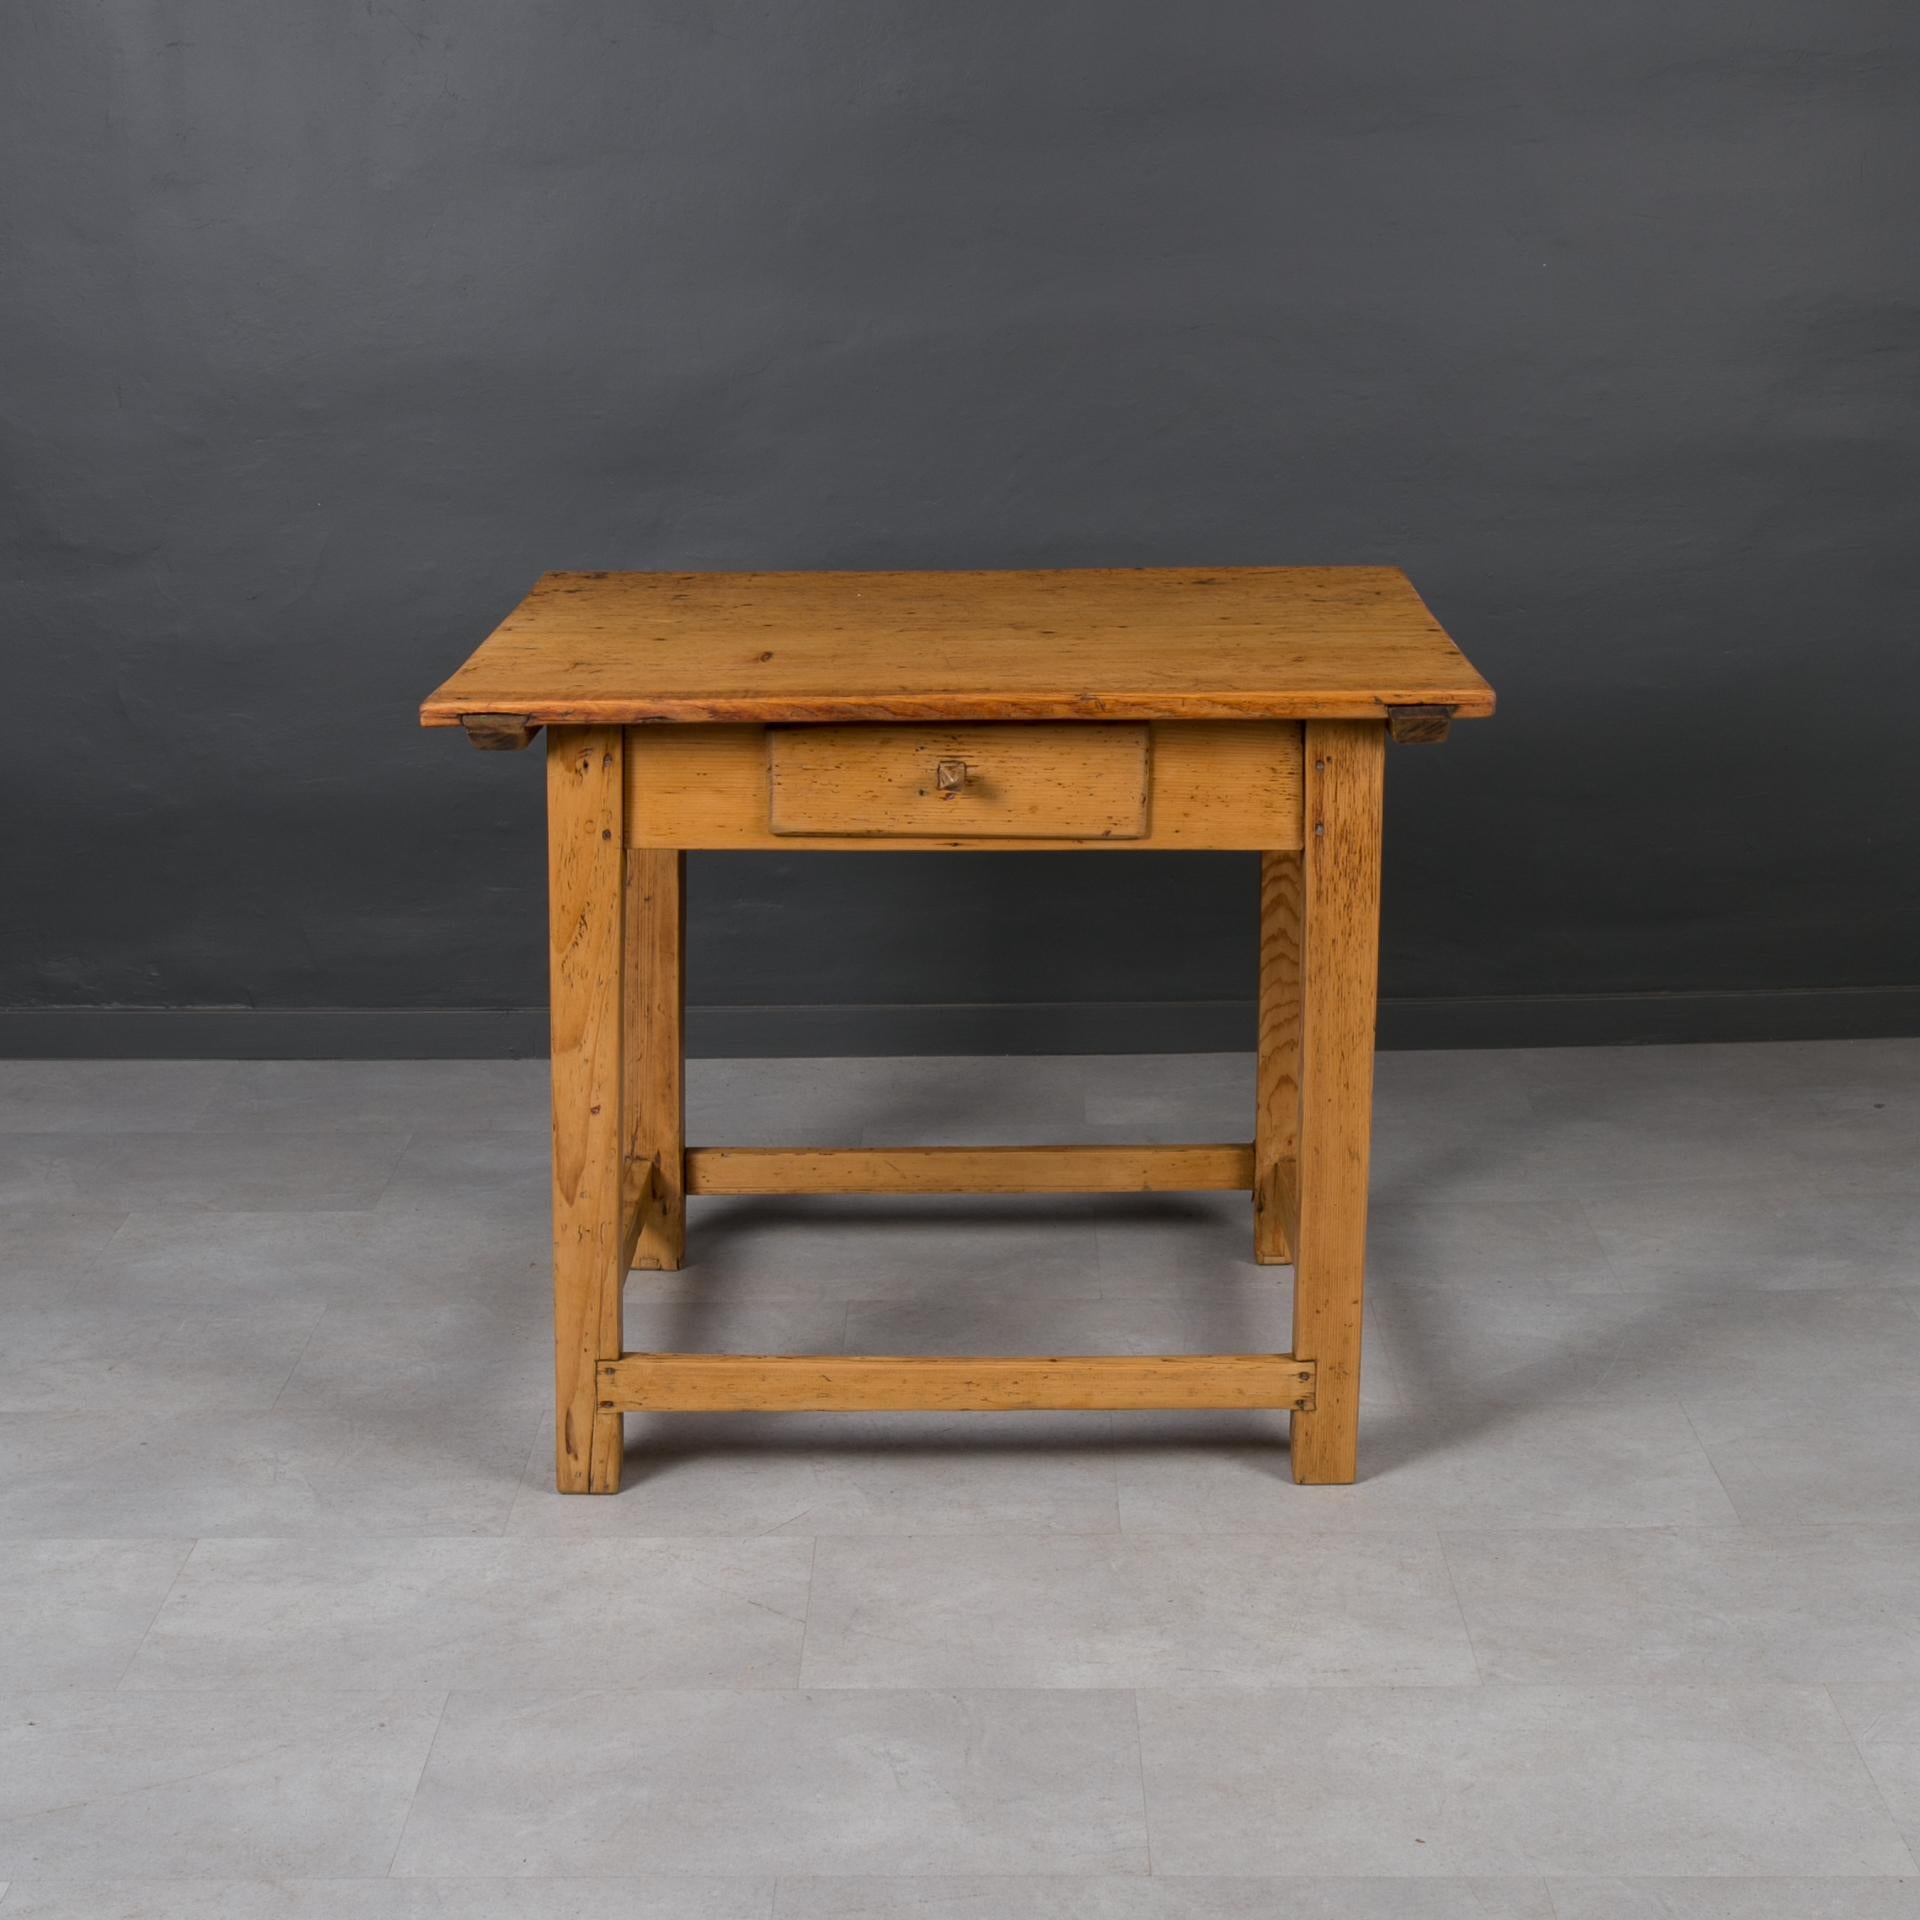 Hungarian Vintage Pine Wood Table, Rustic Style, Prep or Dining Table, Kitchen Island For Sale